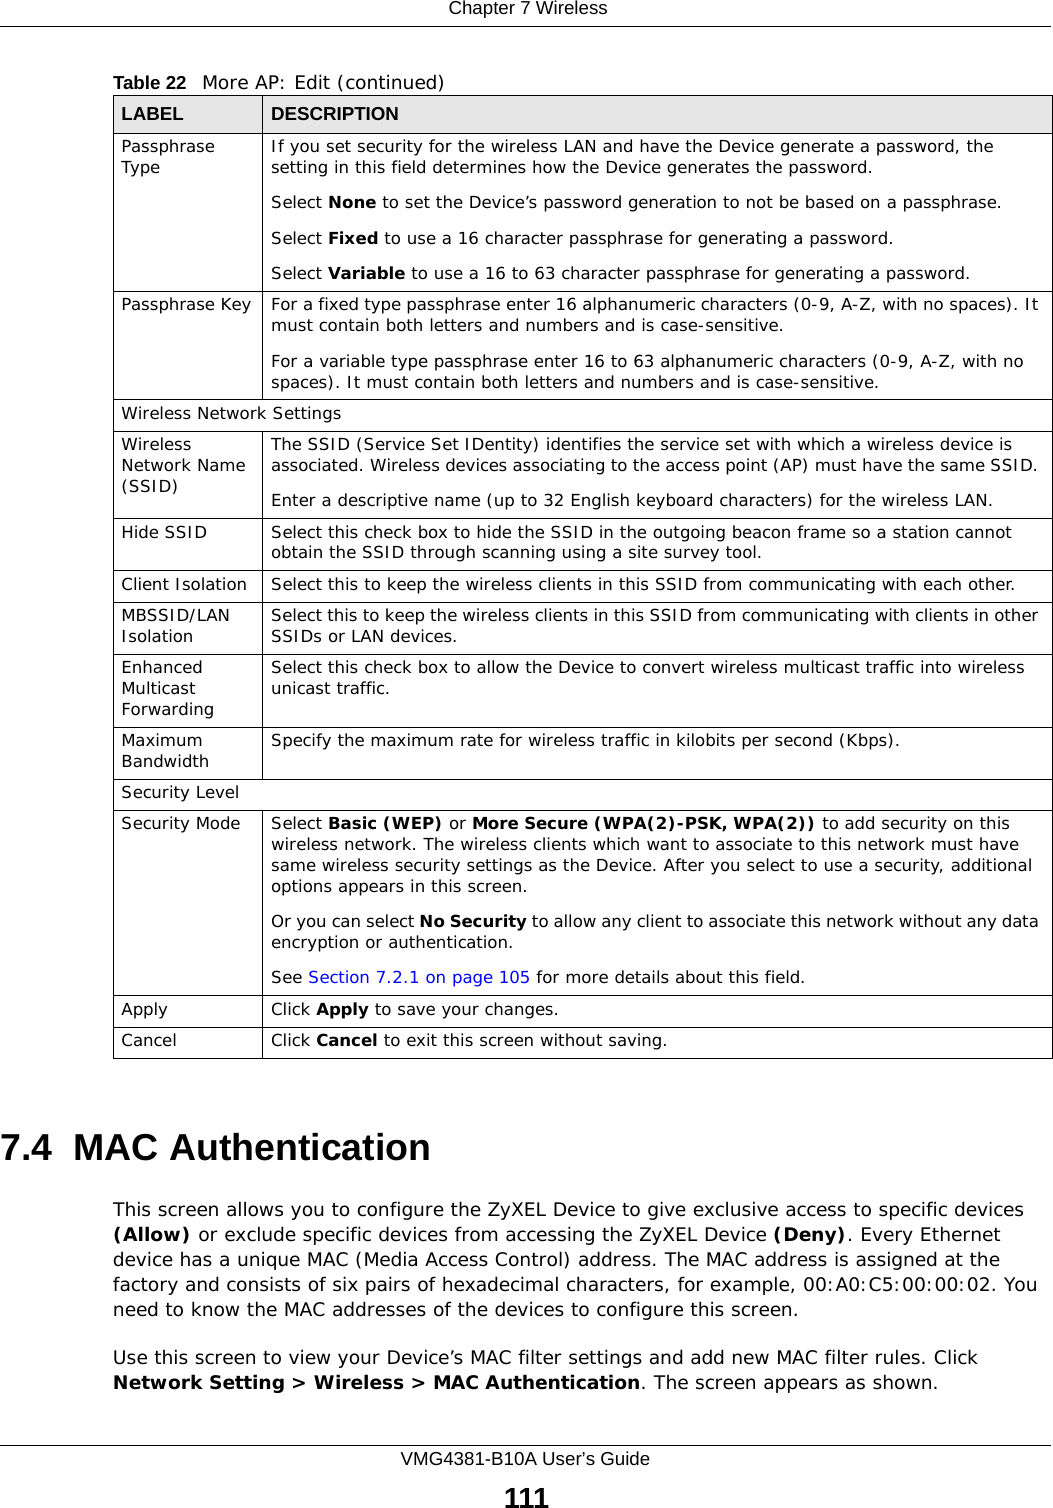  Chapter 7 WirelessVMG4381-B10A User’s Guide1117.4  MAC Authentication    This screen allows you to configure the ZyXEL Device to give exclusive access to specific devices (Allow) or exclude specific devices from accessing the ZyXEL Device (Deny). Every Ethernet device has a unique MAC (Media Access Control) address. The MAC address is assigned at the factory and consists of six pairs of hexadecimal characters, for example, 00:A0:C5:00:00:02. You need to know the MAC addresses of the devices to configure this screen.Use this screen to view your Device’s MAC filter settings and add new MAC filter rules. Click Network Setting &gt; Wireless &gt; MAC Authentication. The screen appears as shown.Passphrase Type If you set security for the wireless LAN and have the Device generate a password, the setting in this field determines how the Device generates the password.Select None to set the Device’s password generation to not be based on a passphrase. Select Fixed to use a 16 character passphrase for generating a password.Select Variable to use a 16 to 63 character passphrase for generating a password.Passphrase Key For a fixed type passphrase enter 16 alphanumeric characters (0-9, A-Z, with no spaces). It must contain both letters and numbers and is case-sensitive.For a variable type passphrase enter 16 to 63 alphanumeric characters (0-9, A-Z, with no spaces). It must contain both letters and numbers and is case-sensitive.Wireless Network SettingsWireless Network Name (SSID)The SSID (Service Set IDentity) identifies the service set with which a wireless device is associated. Wireless devices associating to the access point (AP) must have the same SSID. Enter a descriptive name (up to 32 English keyboard characters) for the wireless LAN. Hide SSID Select this check box to hide the SSID in the outgoing beacon frame so a station cannot obtain the SSID through scanning using a site survey tool.Client Isolation  Select this to keep the wireless clients in this SSID from communicating with each other.MBSSID/LAN Isolation  Select this to keep the wireless clients in this SSID from communicating with clients in other SSIDs or LAN devices.Enhanced Multicast Forwarding Select this check box to allow the Device to convert wireless multicast traffic into wireless unicast traffic.Maximum Bandwidth Specify the maximum rate for wireless traffic in kilobits per second (Kbps).Security LevelSecurity Mode Select Basic (WEP) or More Secure (WPA(2)-PSK, WPA(2)) to add security on this wireless network. The wireless clients which want to associate to this network must have same wireless security settings as the Device. After you select to use a security, additional options appears in this screen.  Or you can select No Security to allow any client to associate this network without any data encryption or authentication.See Section 7.2.1 on page 105 for more details about this field.Apply Click Apply to save your changes.Cancel Click Cancel to exit this screen without saving.Table 22   More AP: Edit (continued)LABEL DESCRIPTION